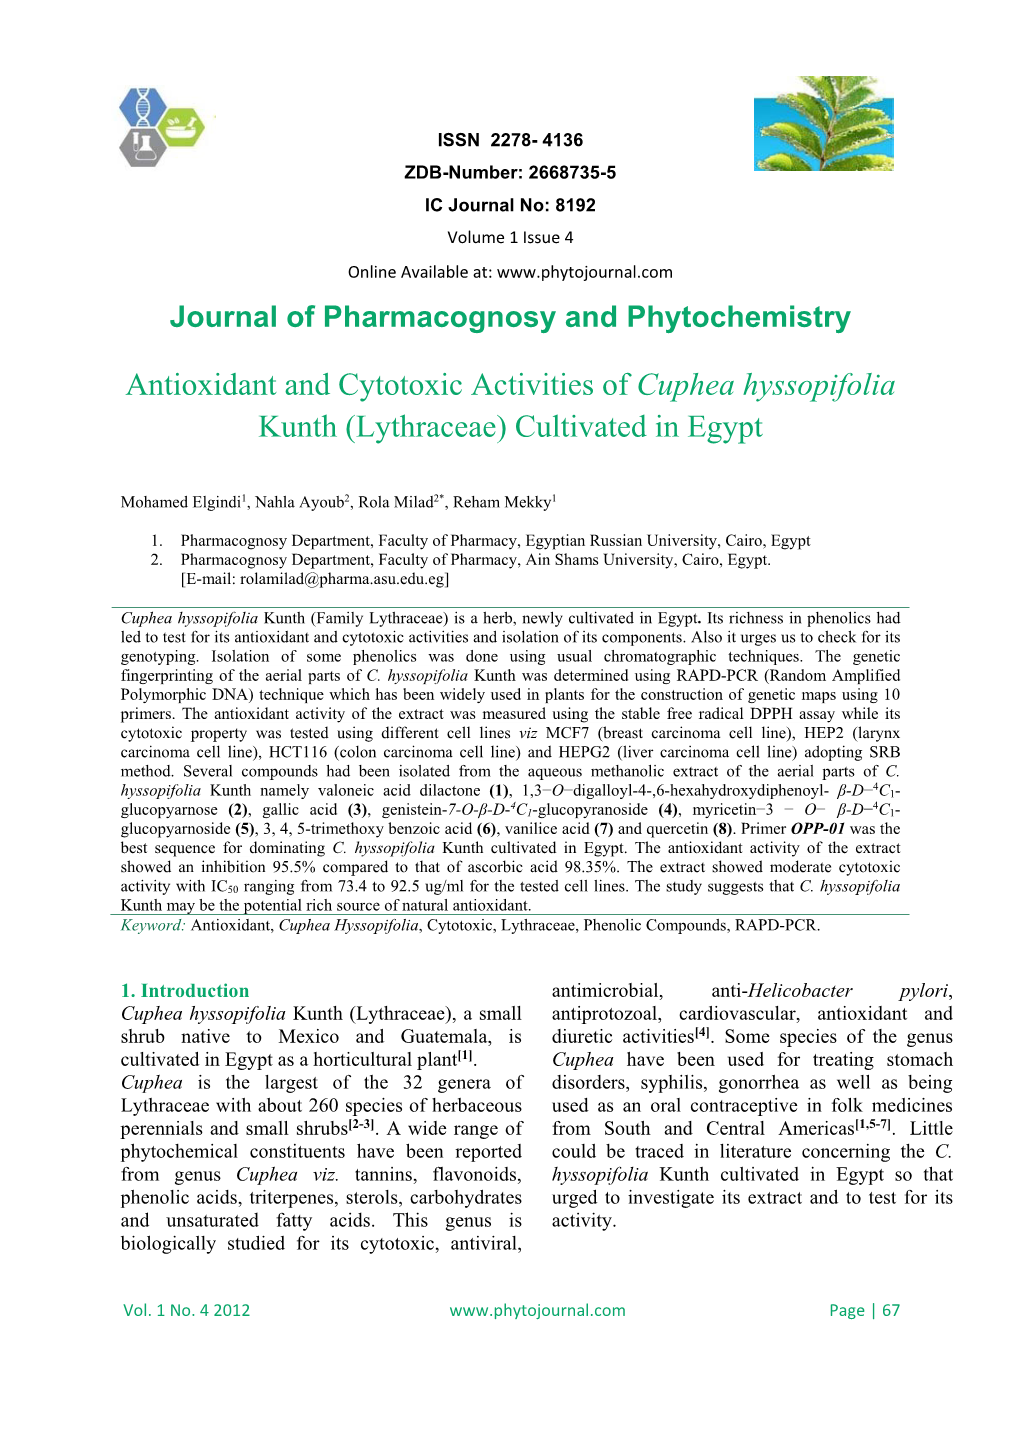 Antioxidant and Cytotoxic Activities of Cuphea Hyssopifolia Kunth (Lythraceae) Cultivated in Egypt